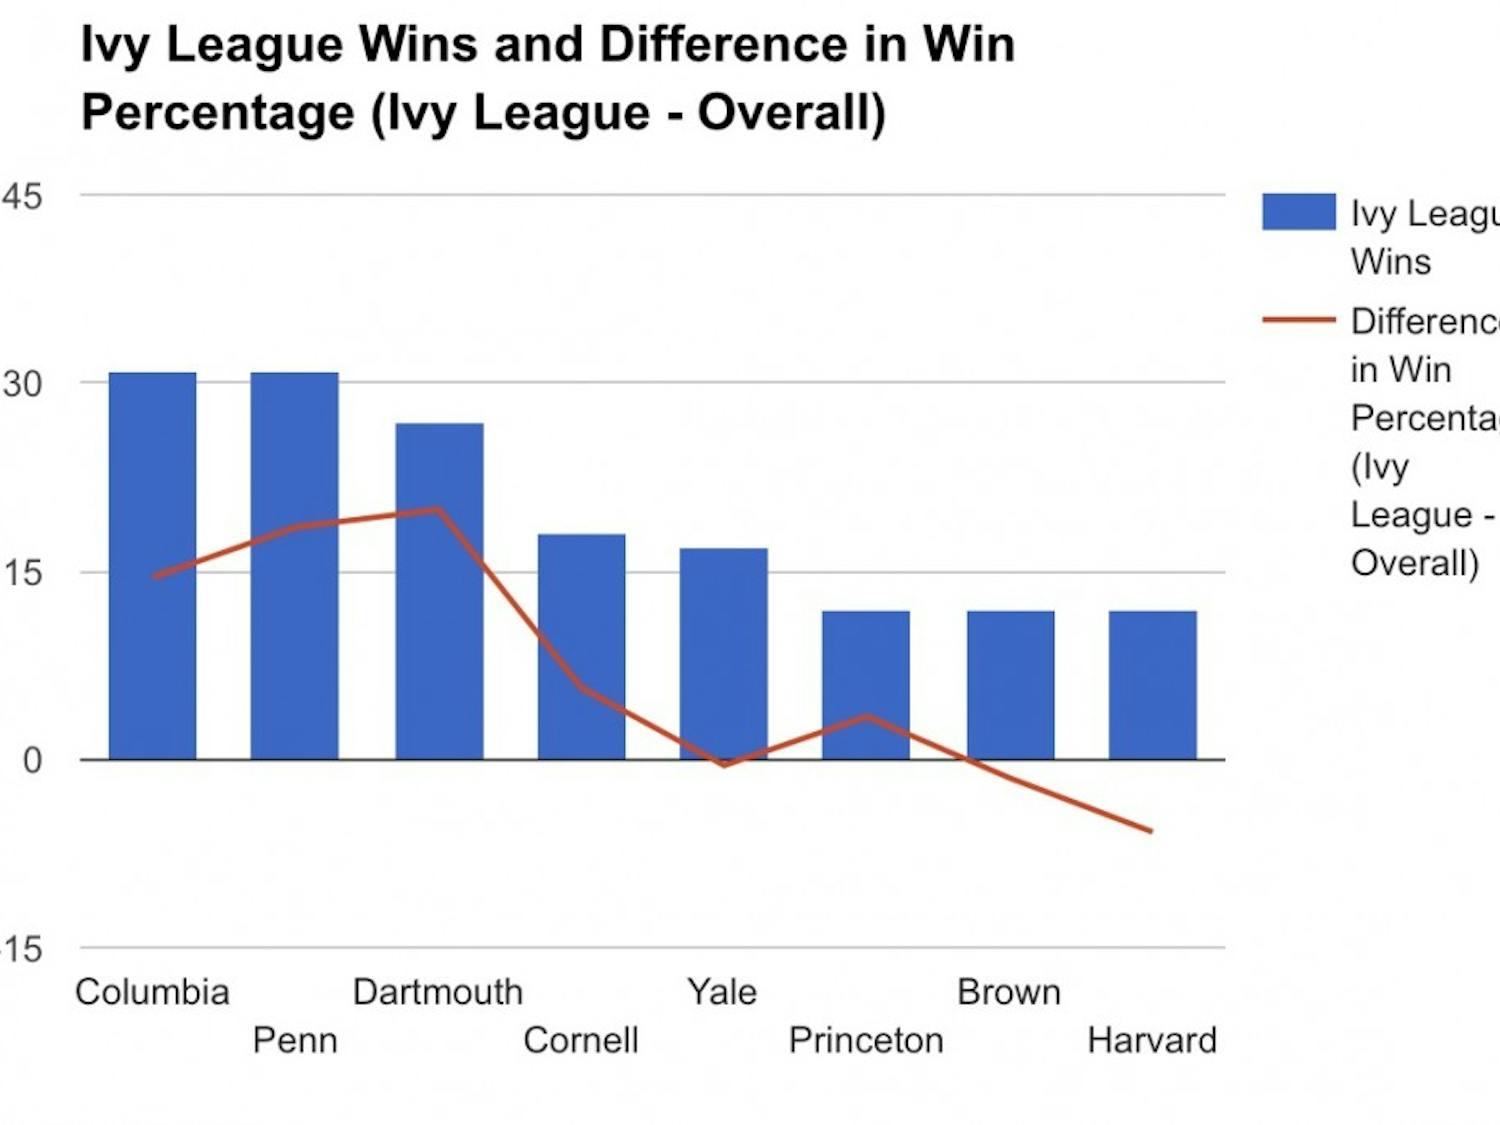 The past two years, the top Ivy baseball teams have had the greatest discrepancies between Ivy and overall win percentage.